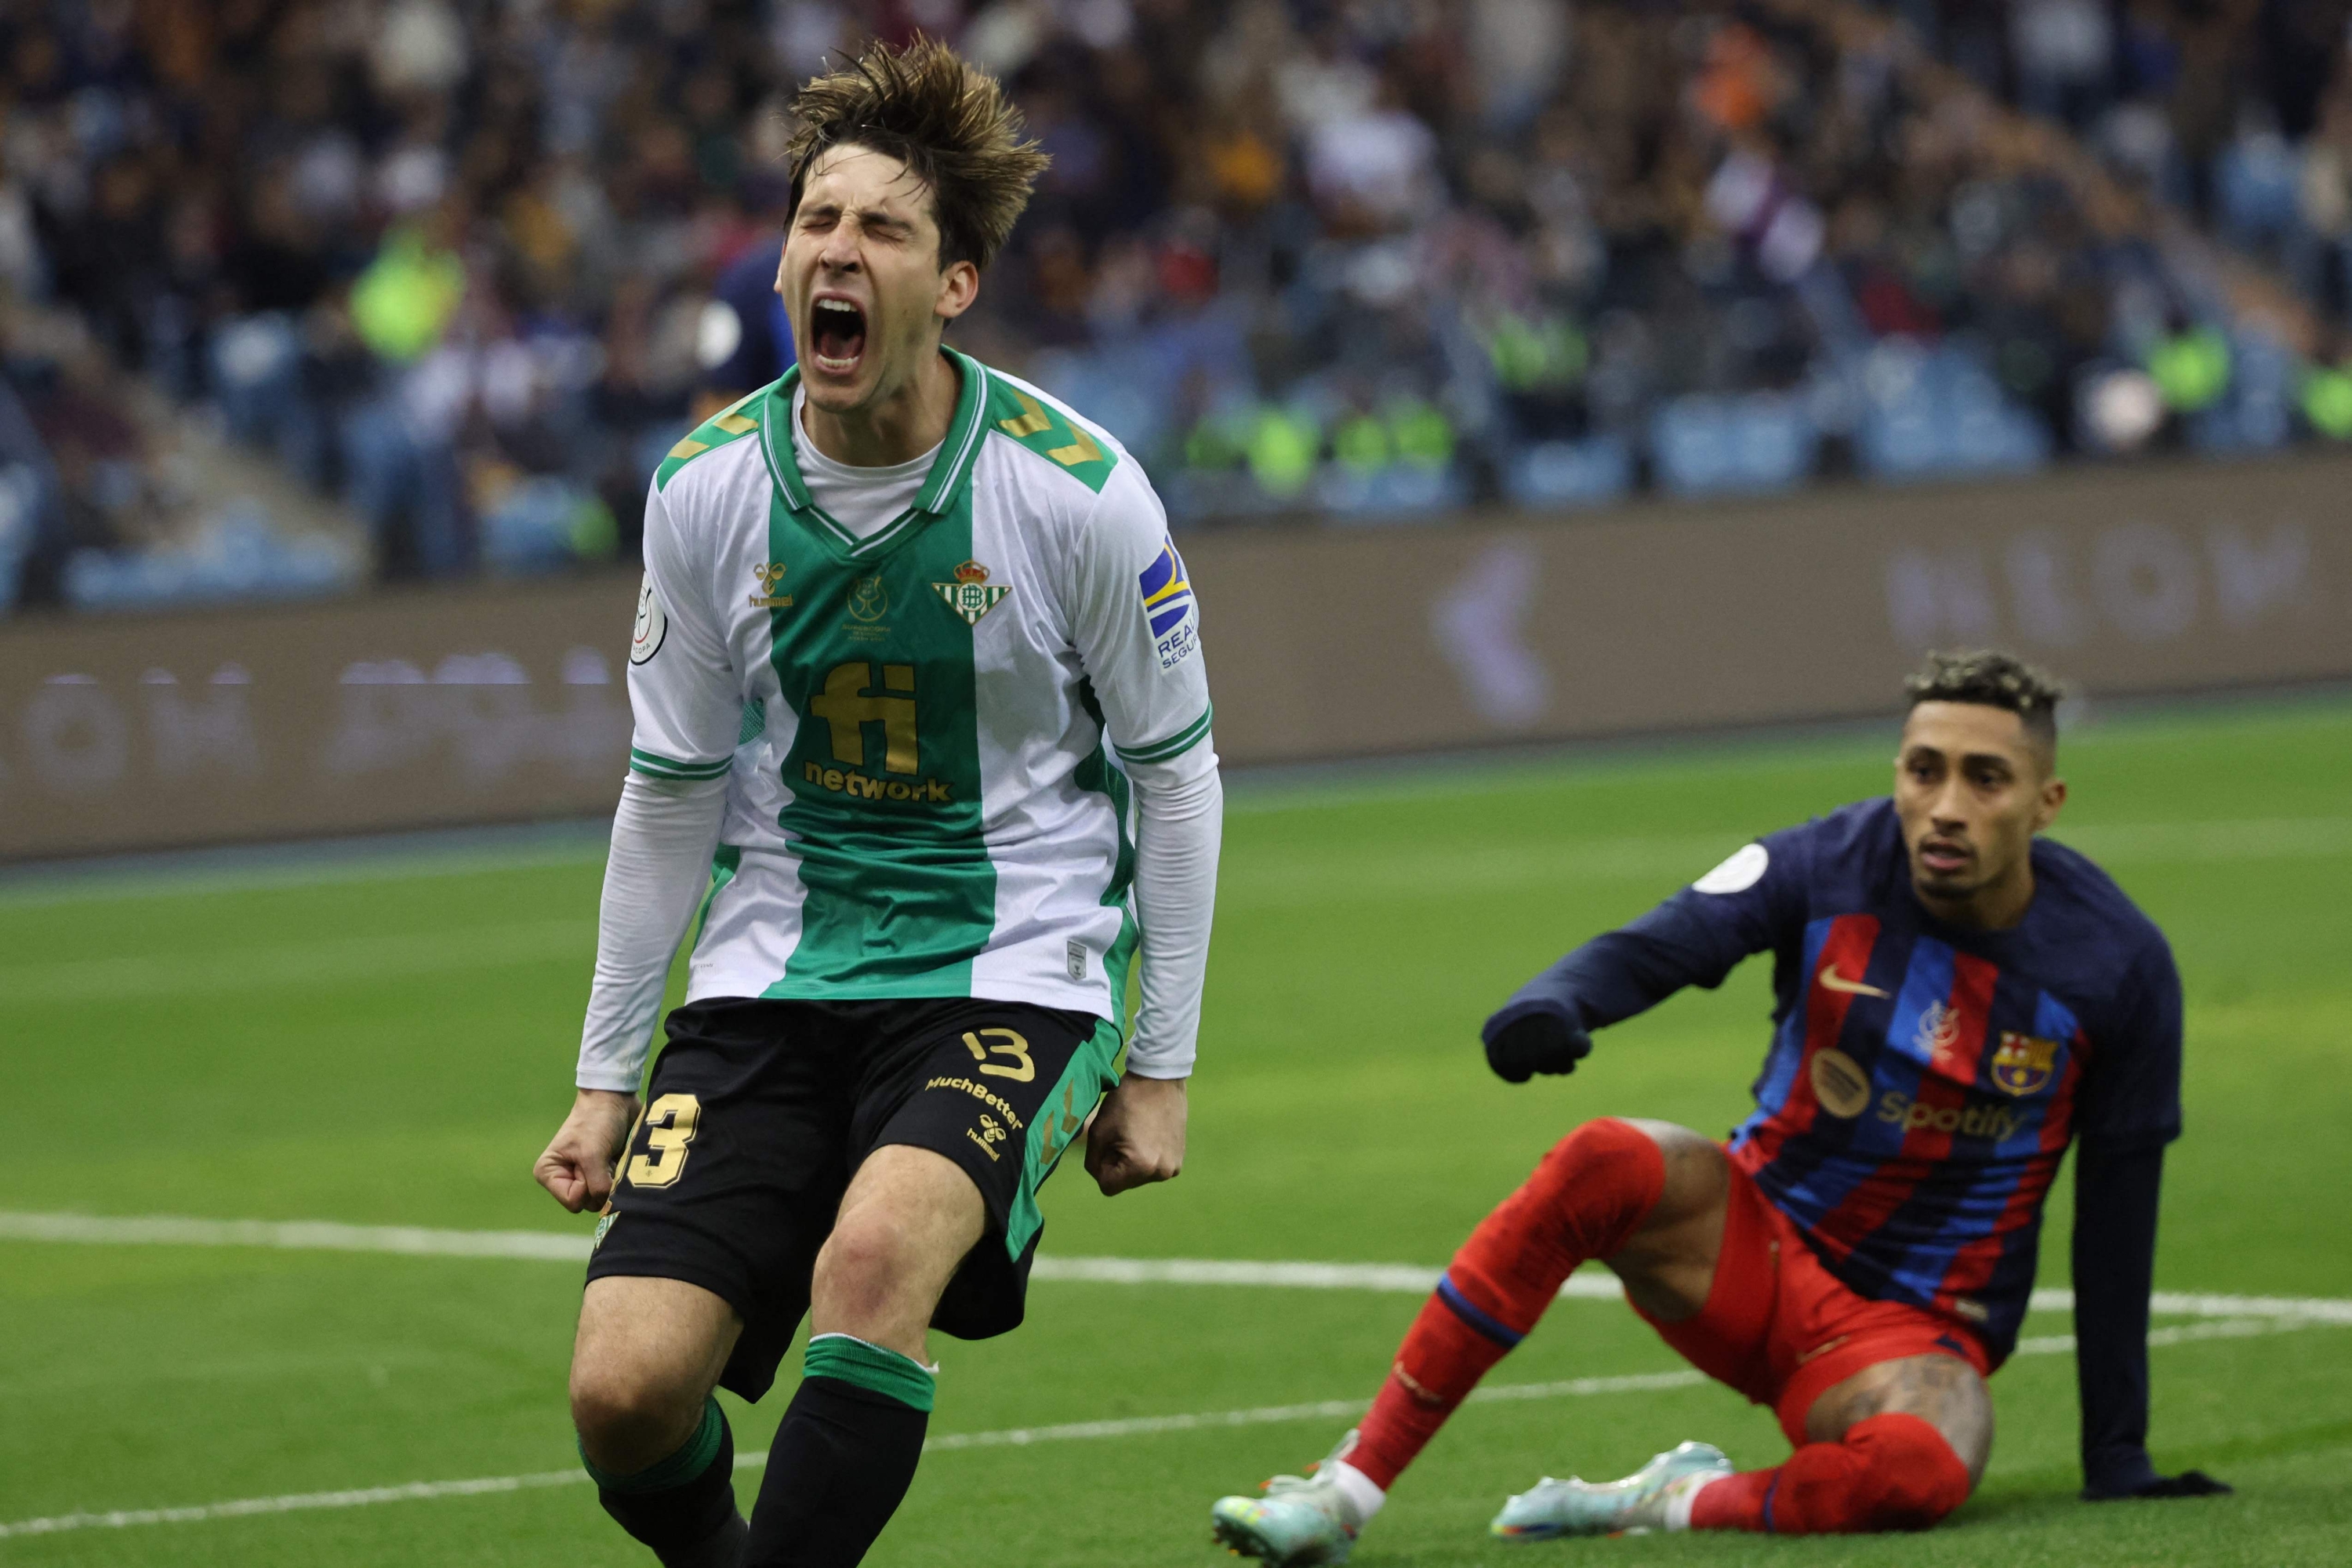 Real Betis' Spanish defender Juan Miranda (L) reacts to a missed chance as Barcelona's Brazilian forward Raphinha sits on the pitch during the Spanish Super Cup semi-final football match between Real Betis and FC Barcelona at the King Fahd International Stadium in Riyadh, Saudi Arabia, on January 12, 2023. (Photo by Giuseppe CACACE / AFP)